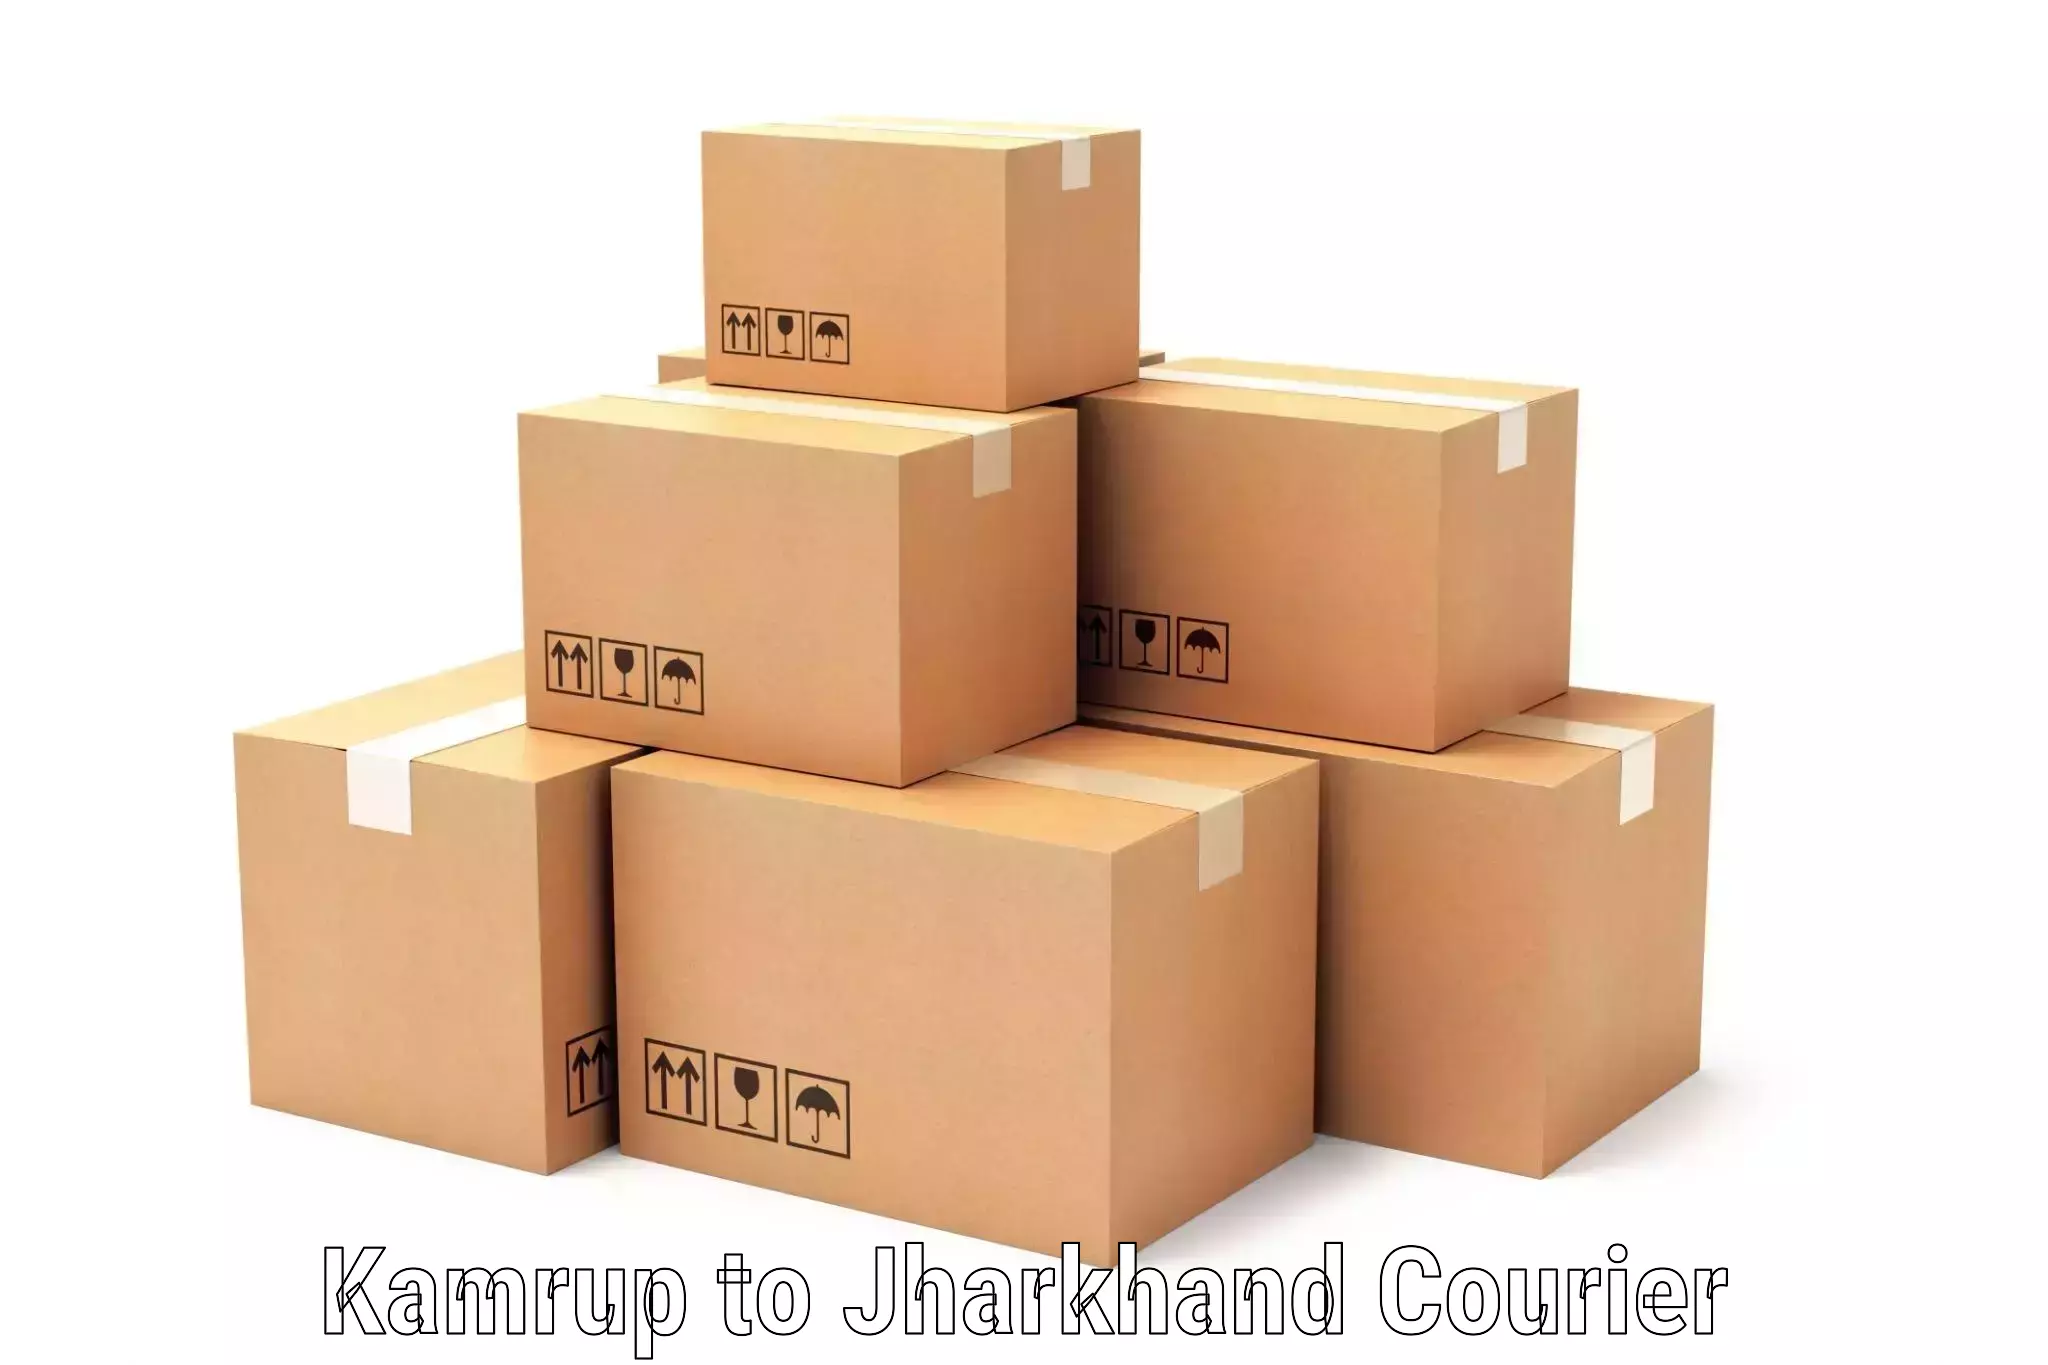 Quality courier services Kamrup to Dhanbad